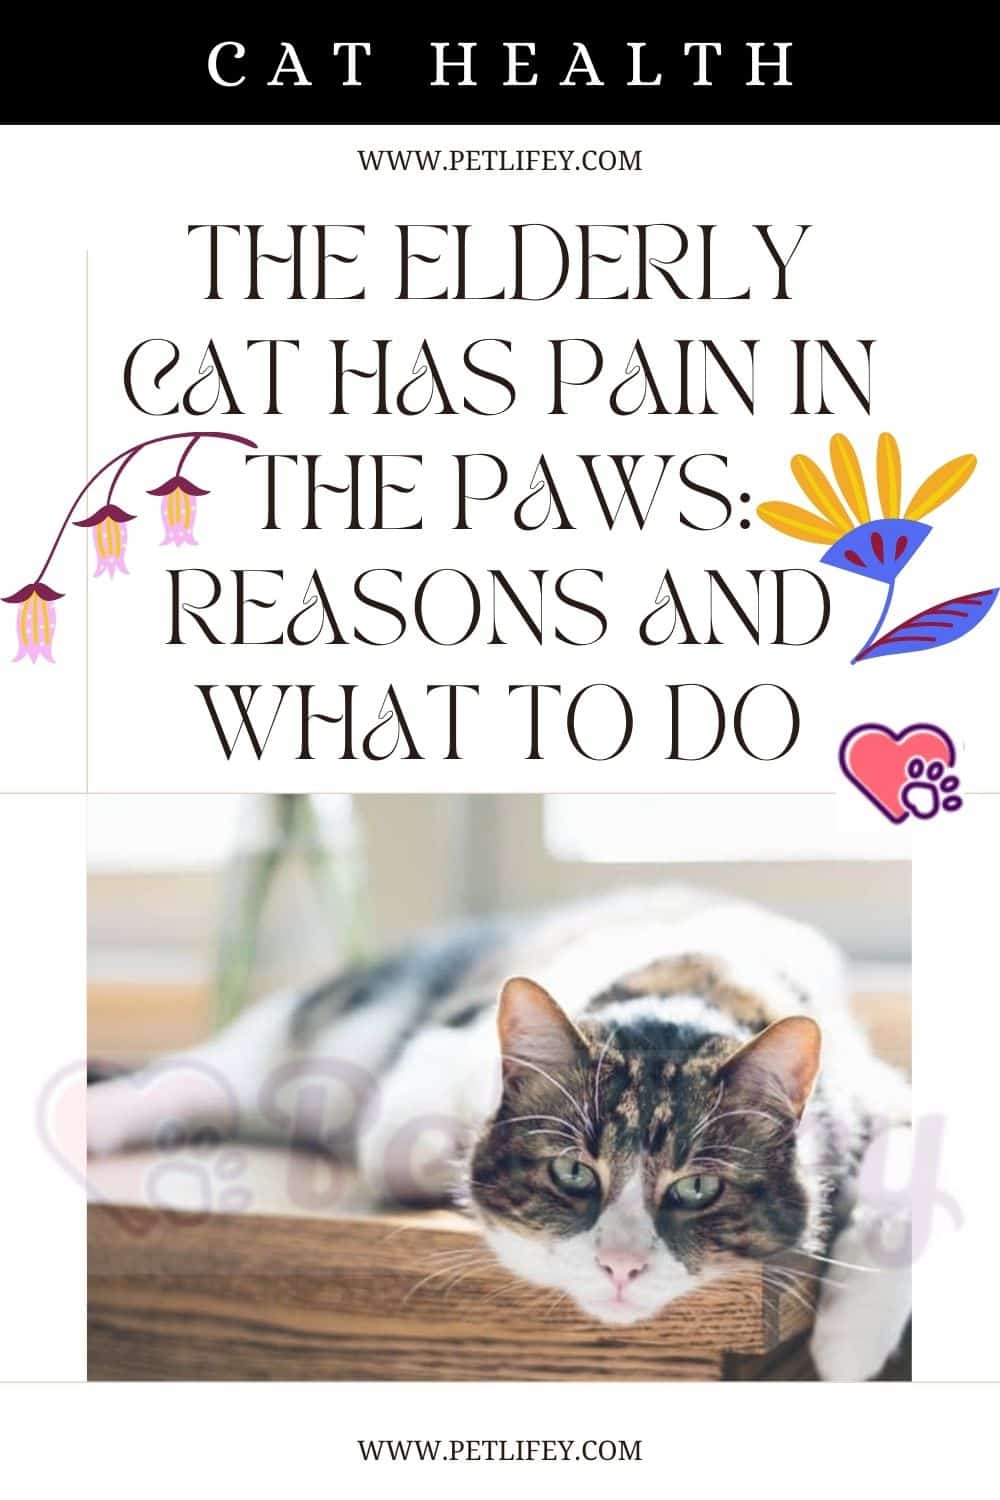 The elderly cat has pain in the paws